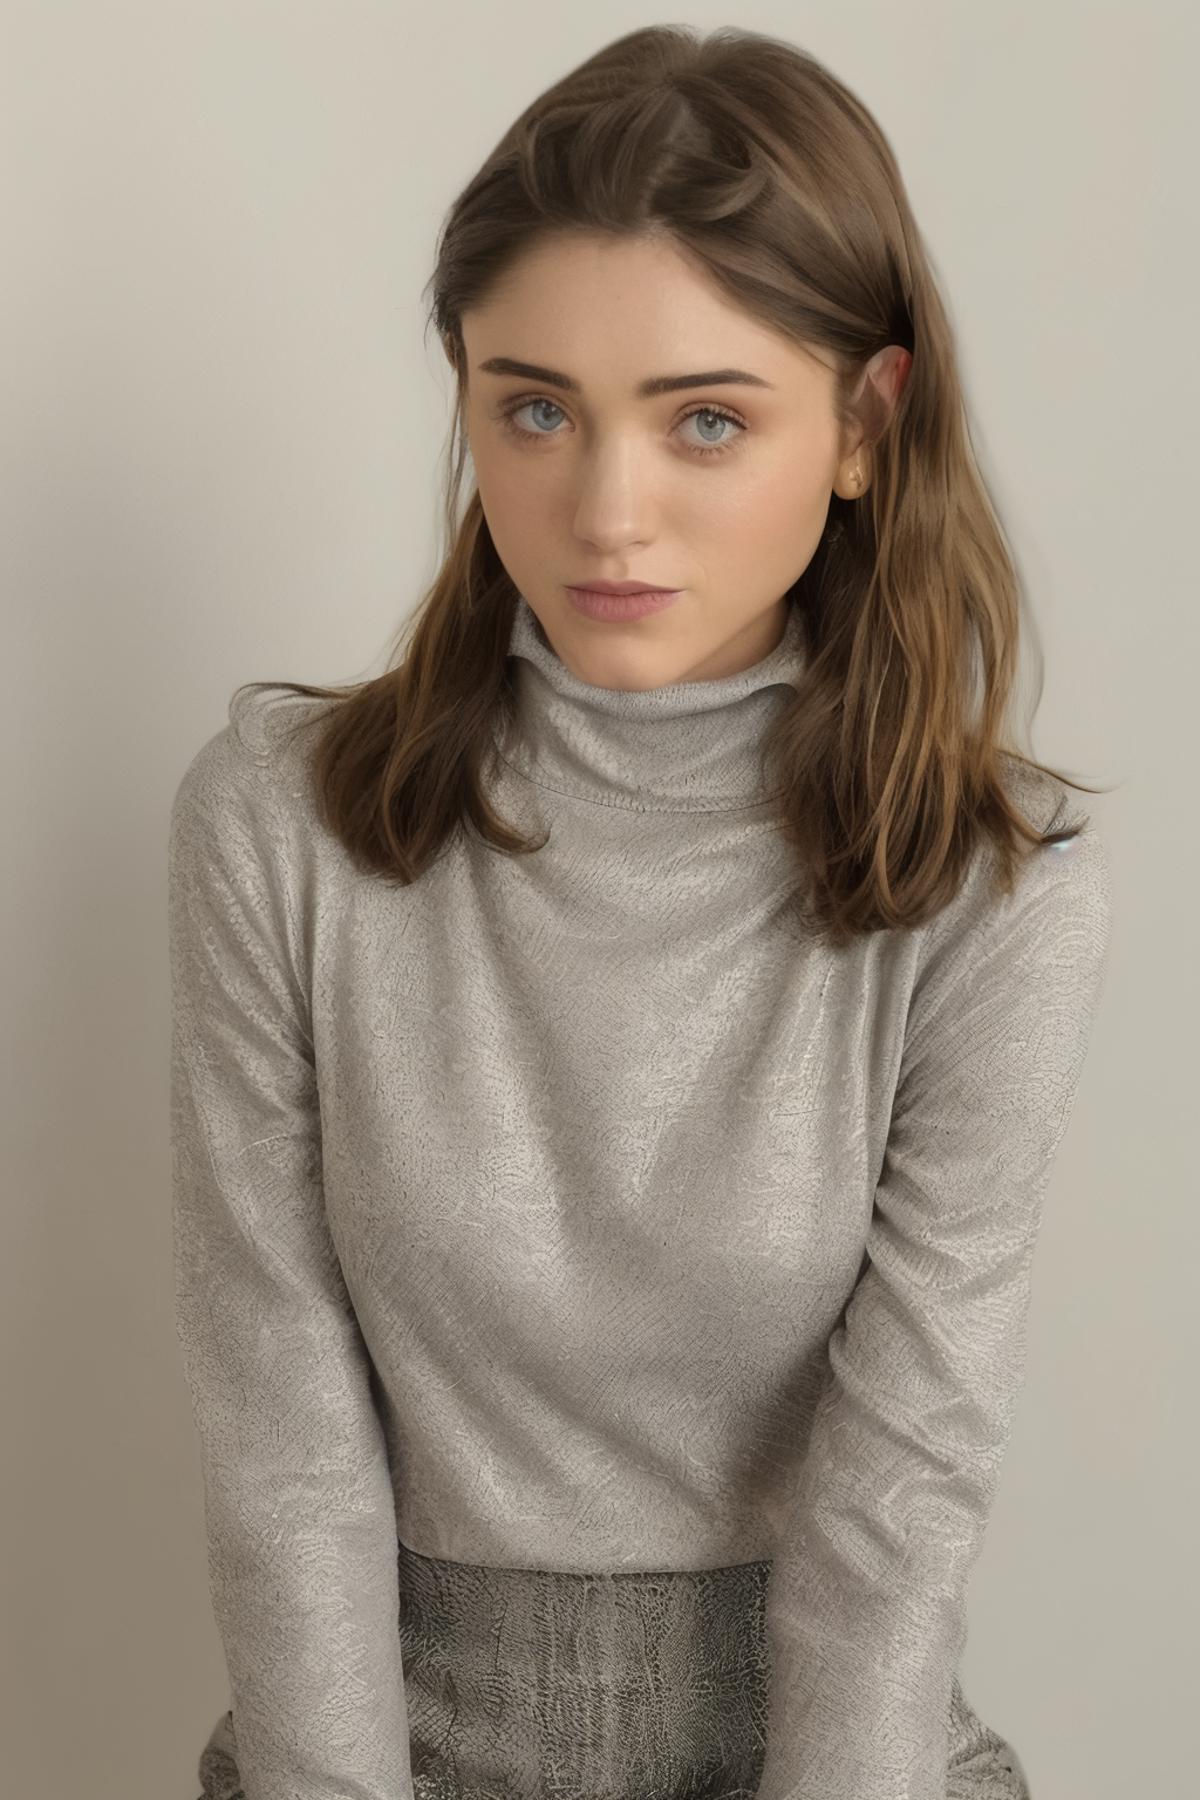 Natalia Dyer image by __2_